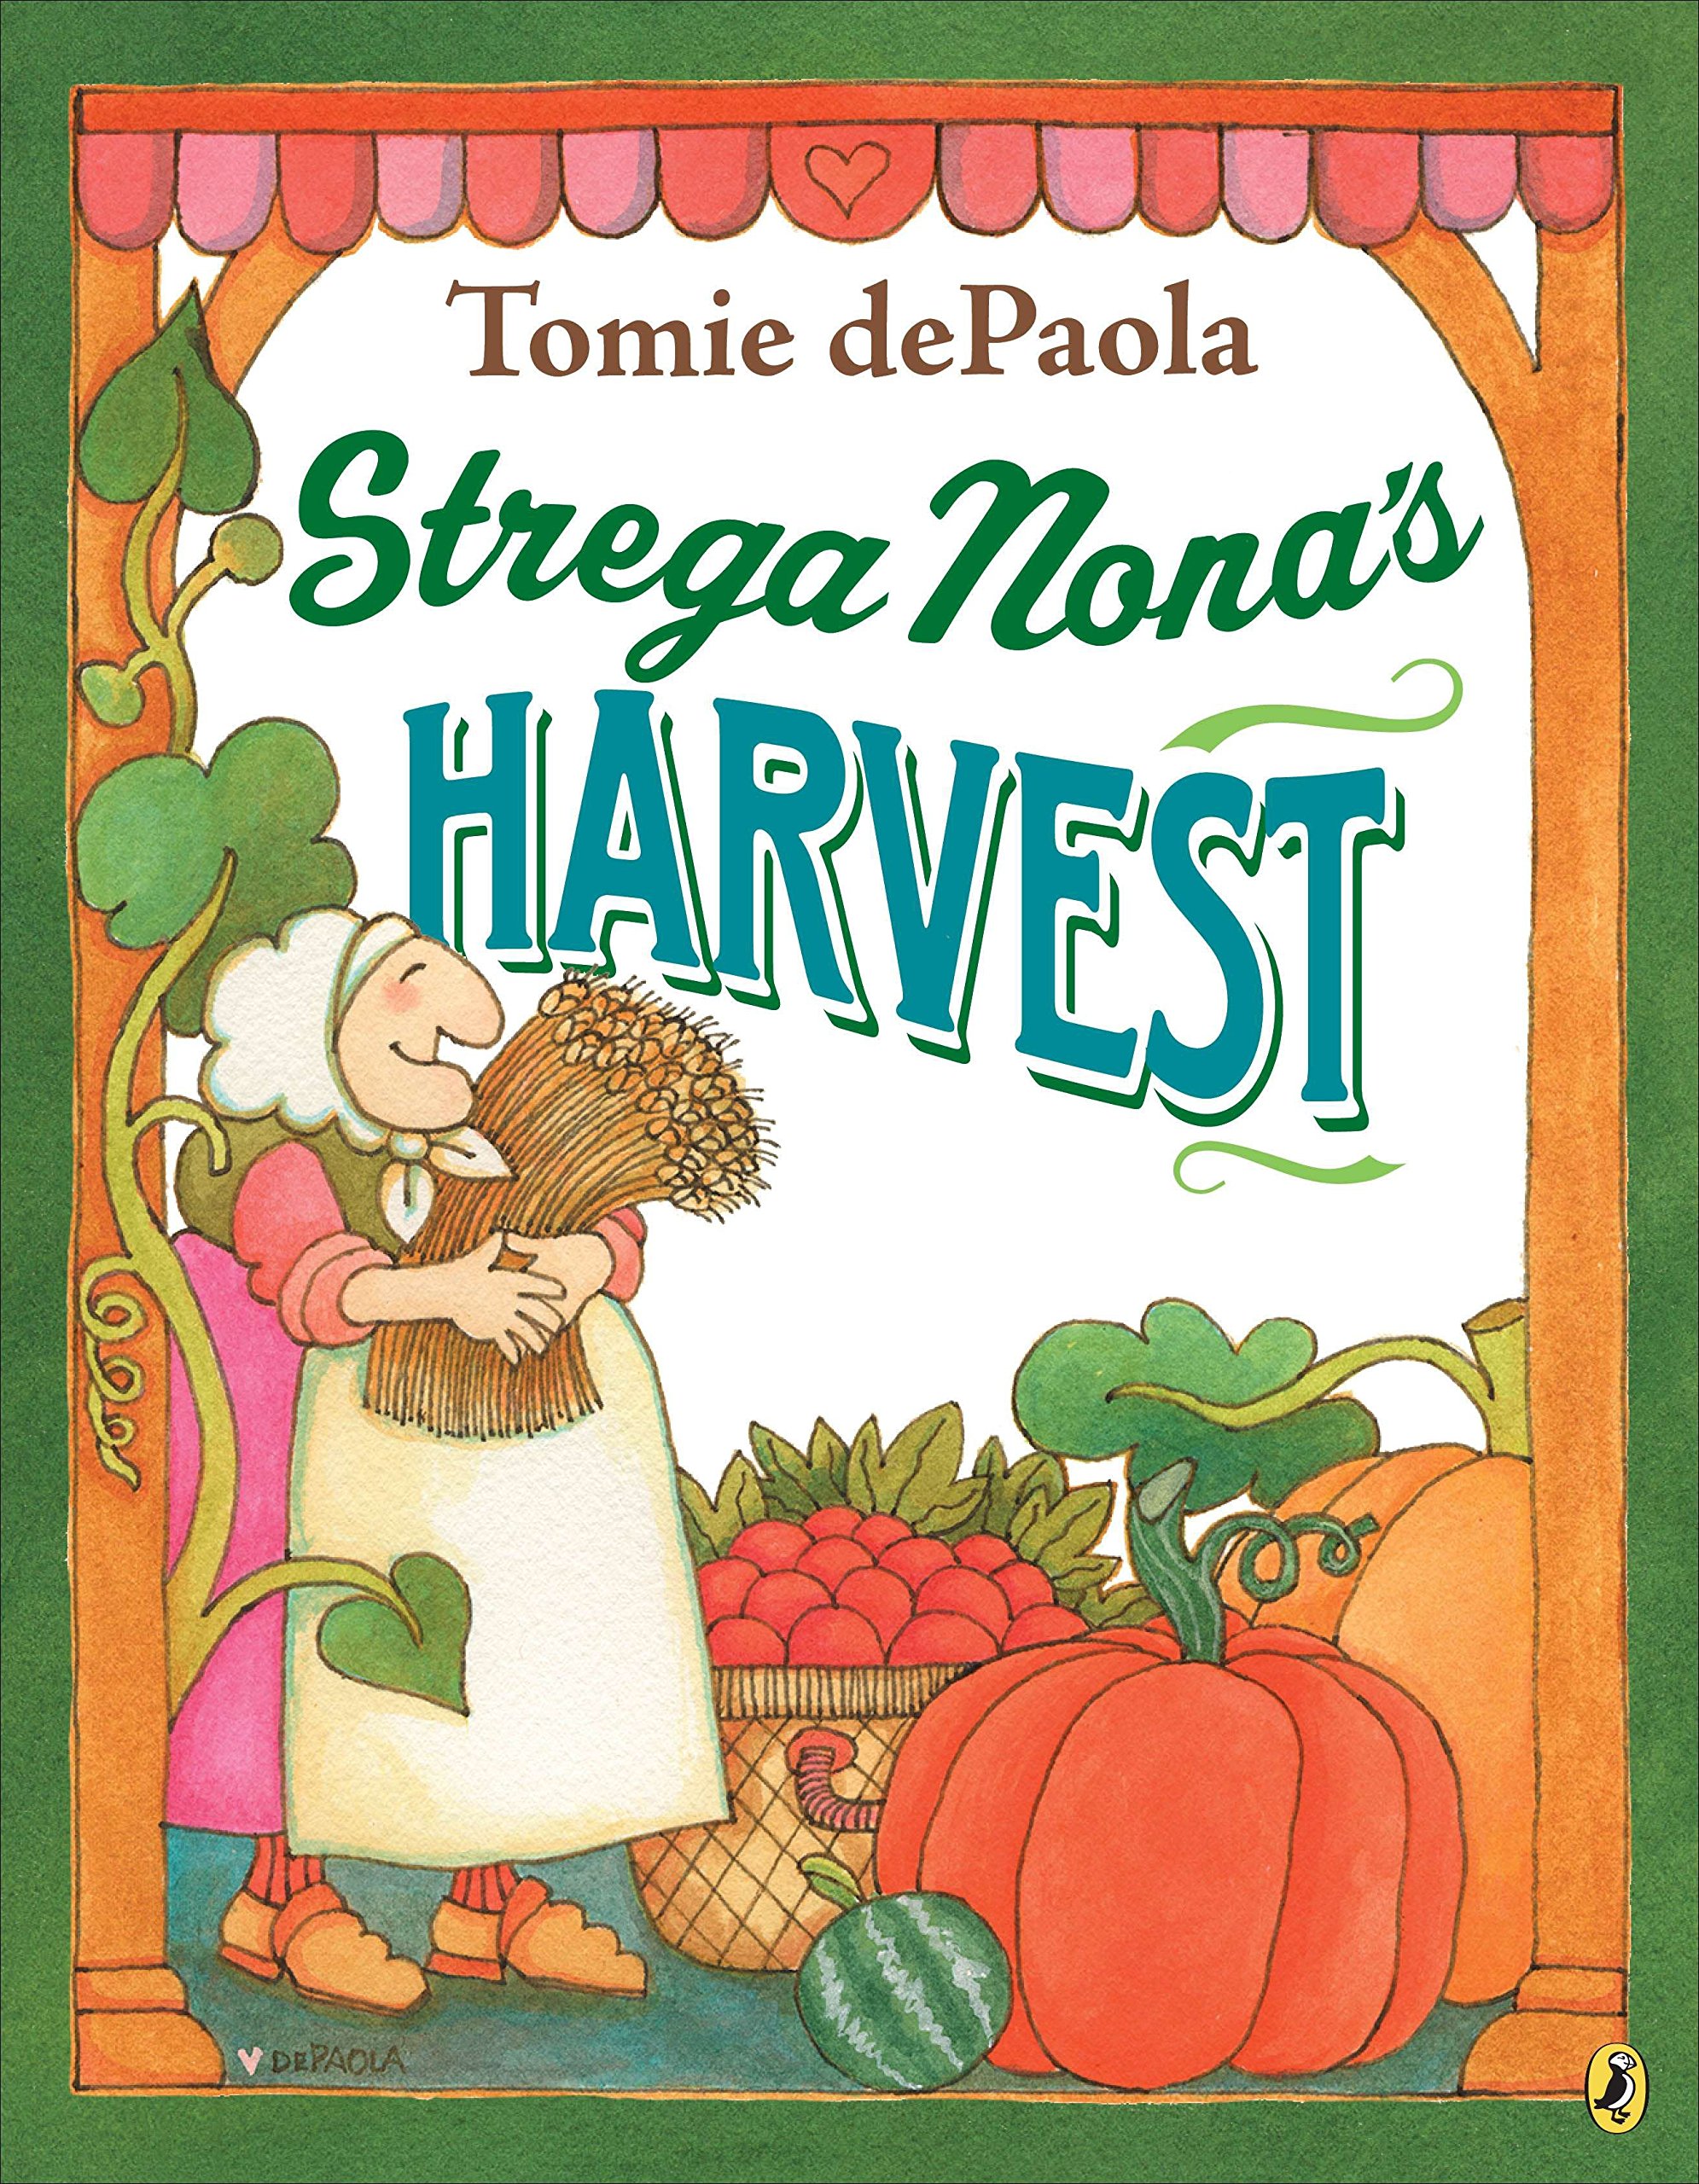 speech and language teaching concepts for Strega Nona's Harvest in speech therapy​ ​